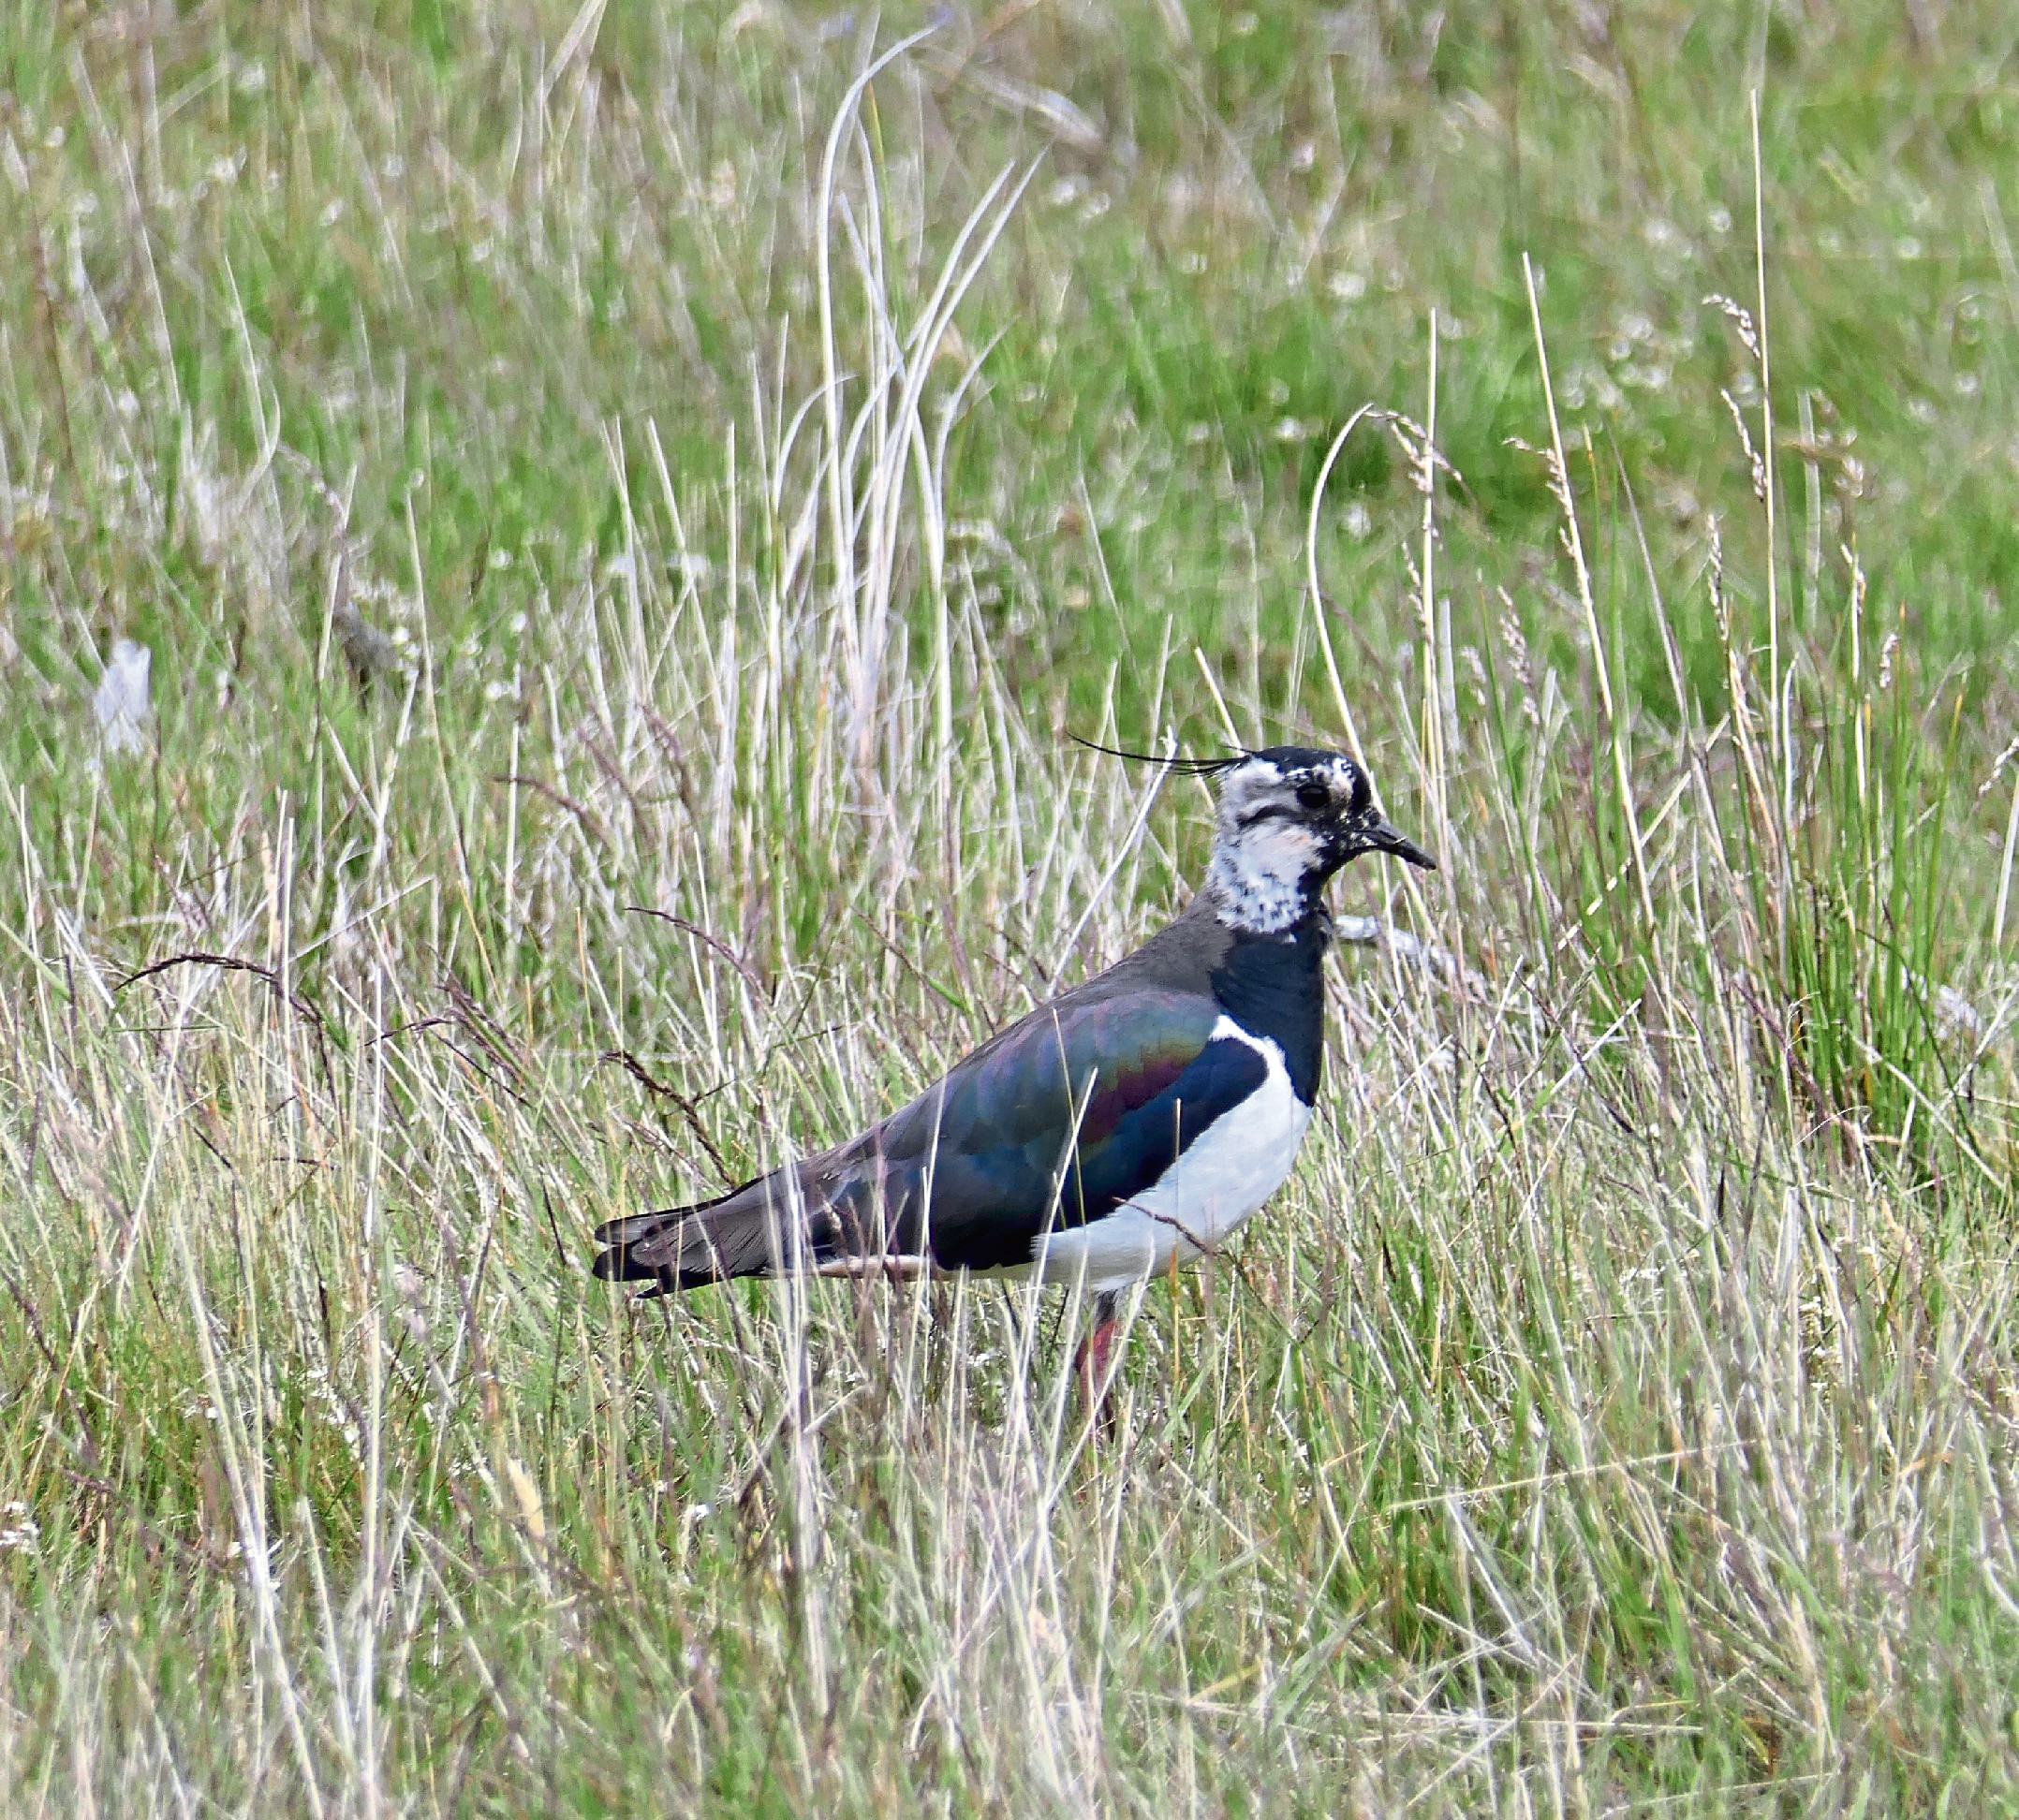 The initiative addresses the needs of some ground-nesting species in decline such as the lapwing.